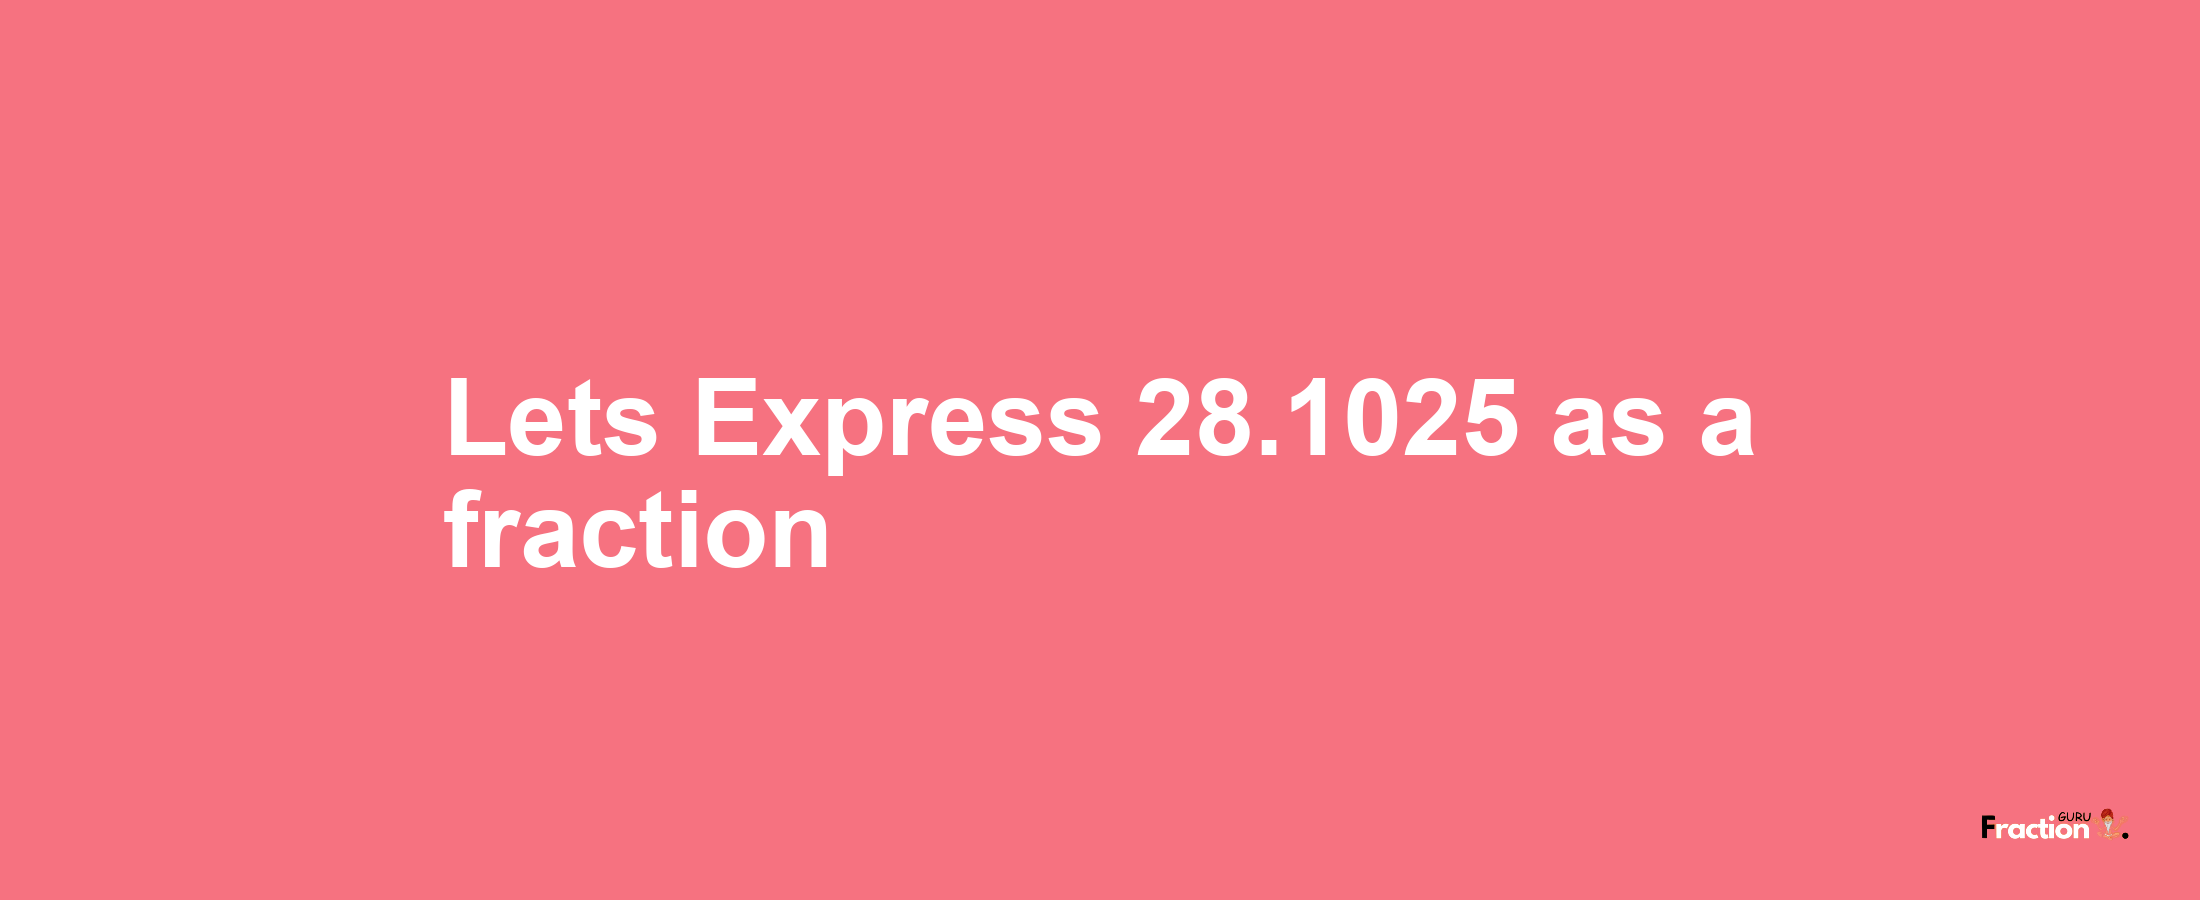 Lets Express 28.1025 as afraction